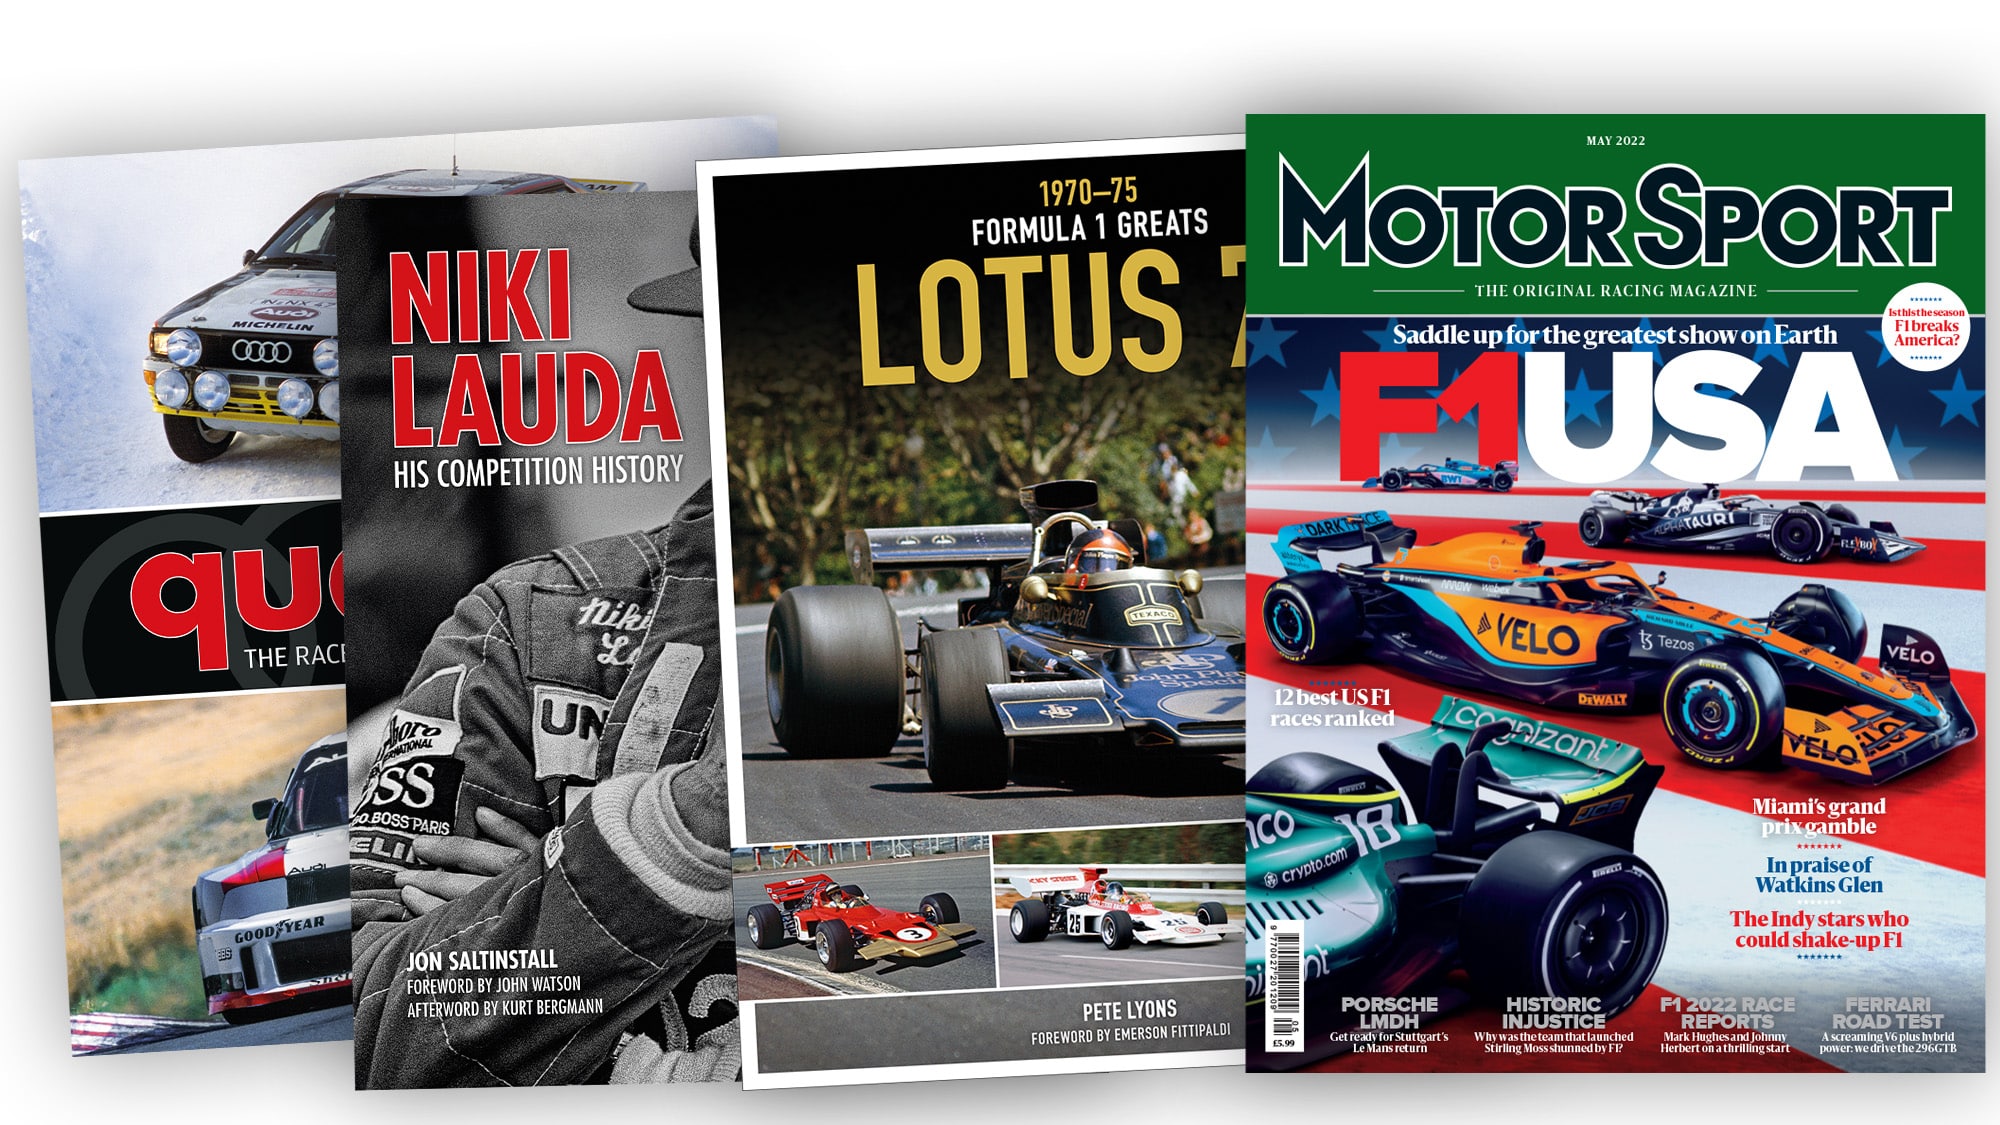 Motor Sport subscription package